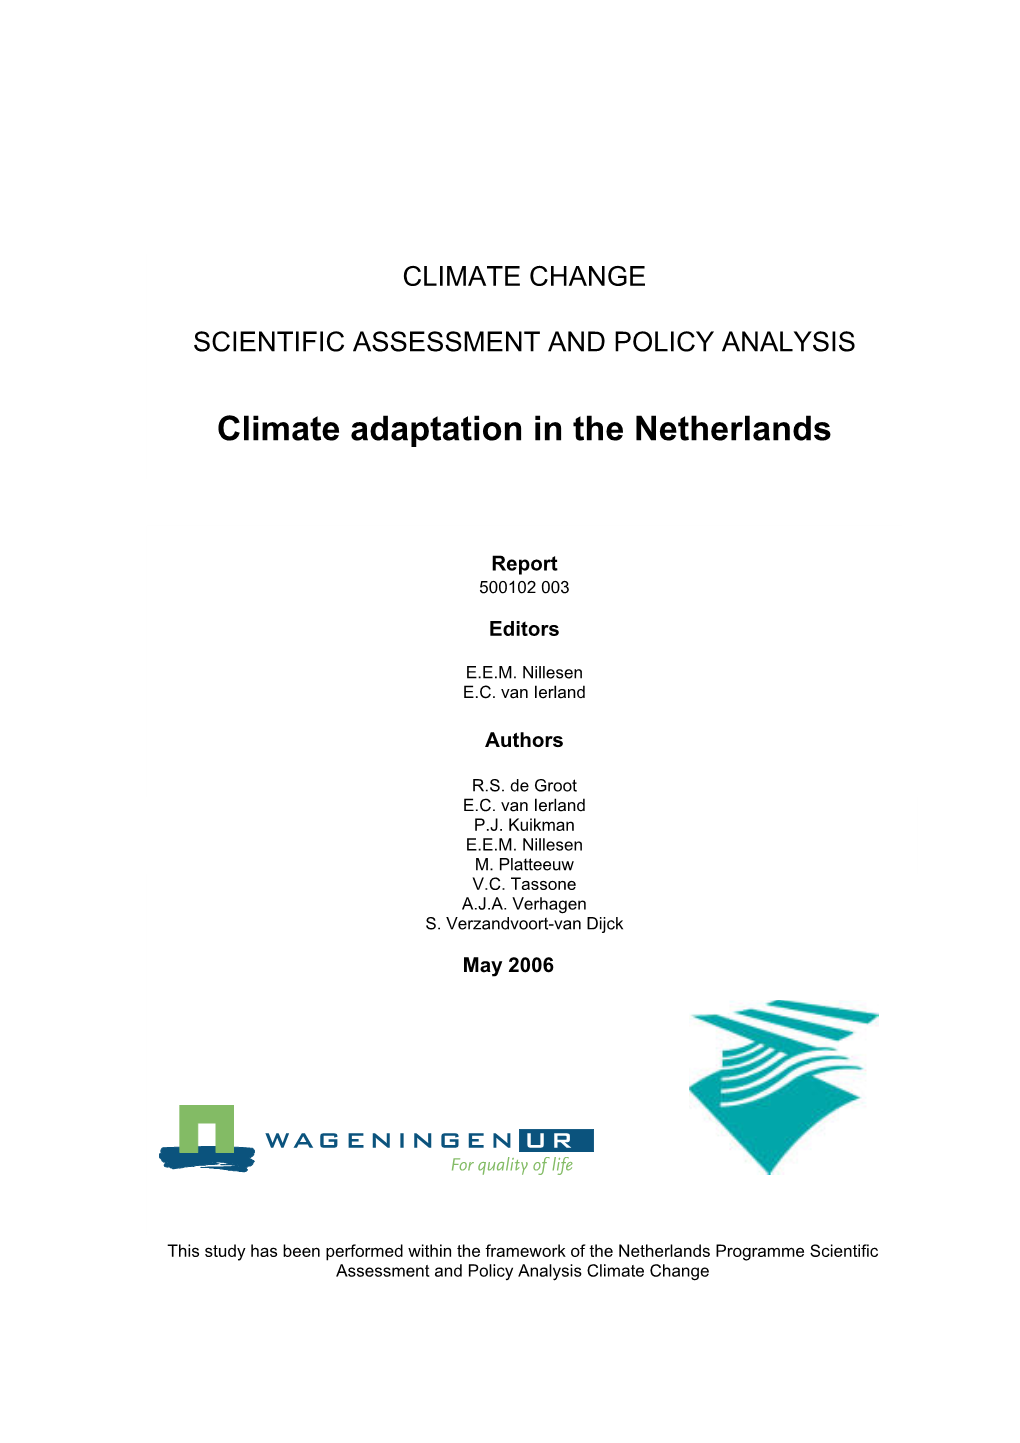 WAB Rapport 500102003 Climate Adaptation in the Netherlands